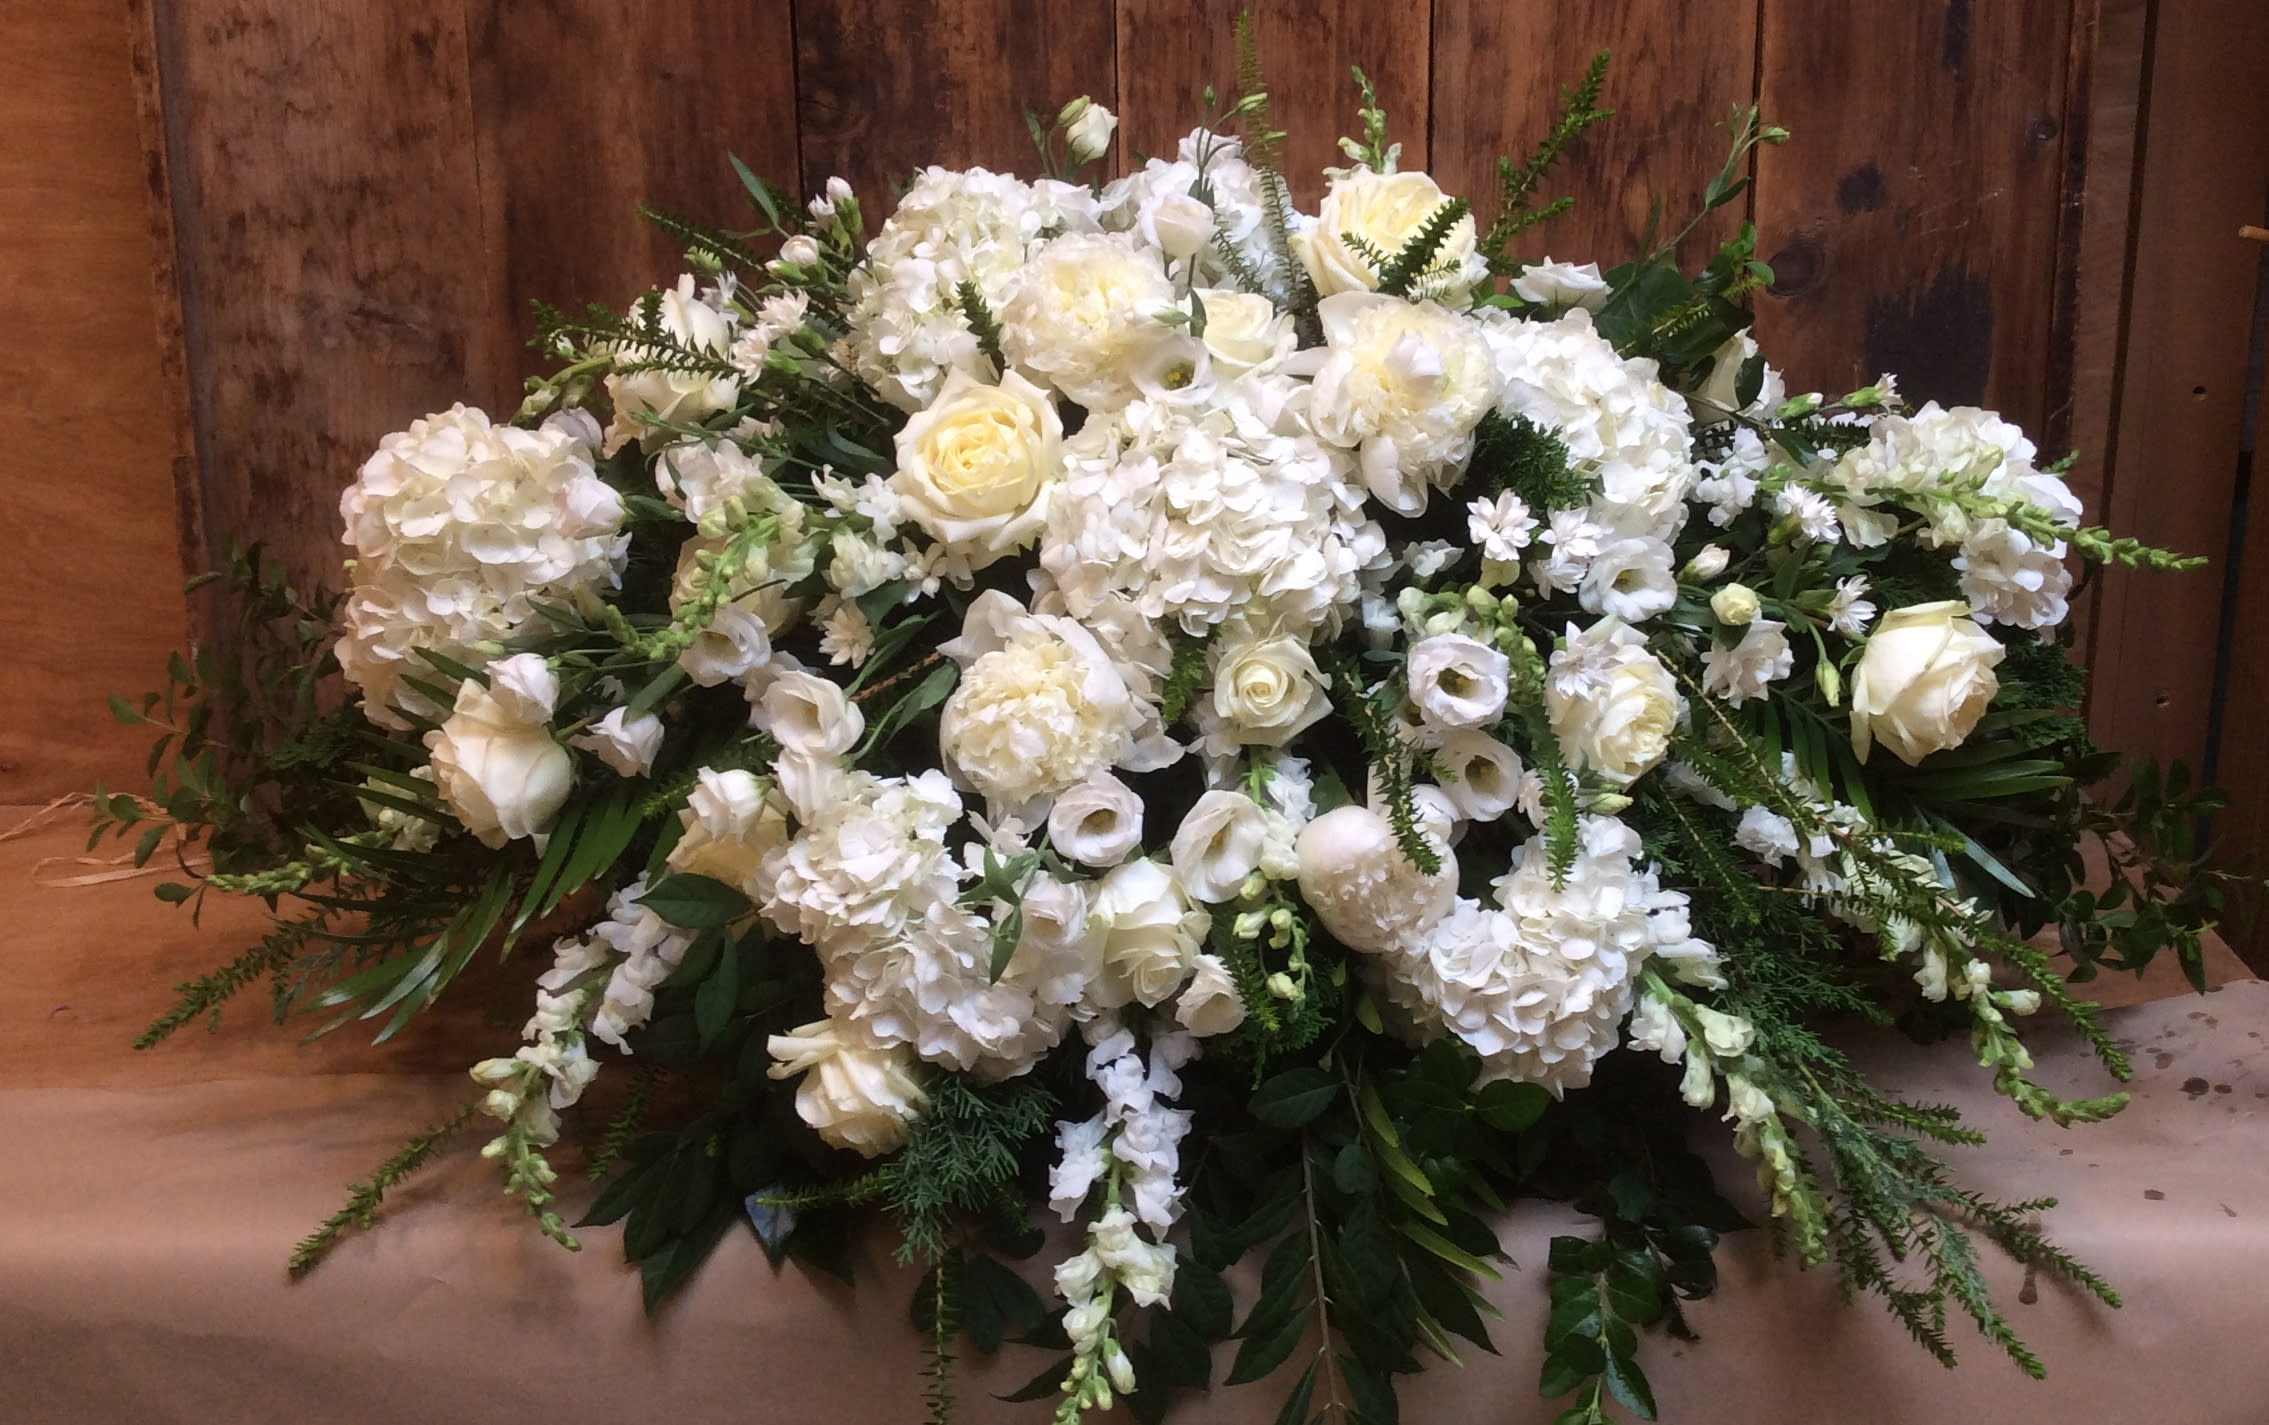 White Casket Blanket - A gracious and tender tribute to a beautiful and cherished life, this elegant casket blanket radiates loveliness and serenity. Its soft and heavenly white flowers delicately speak your heartfelt emotions. White hydrangea, , white roses, white snapdragon, white alstroemeria and seasonal flowers are arranged with lush greenery.